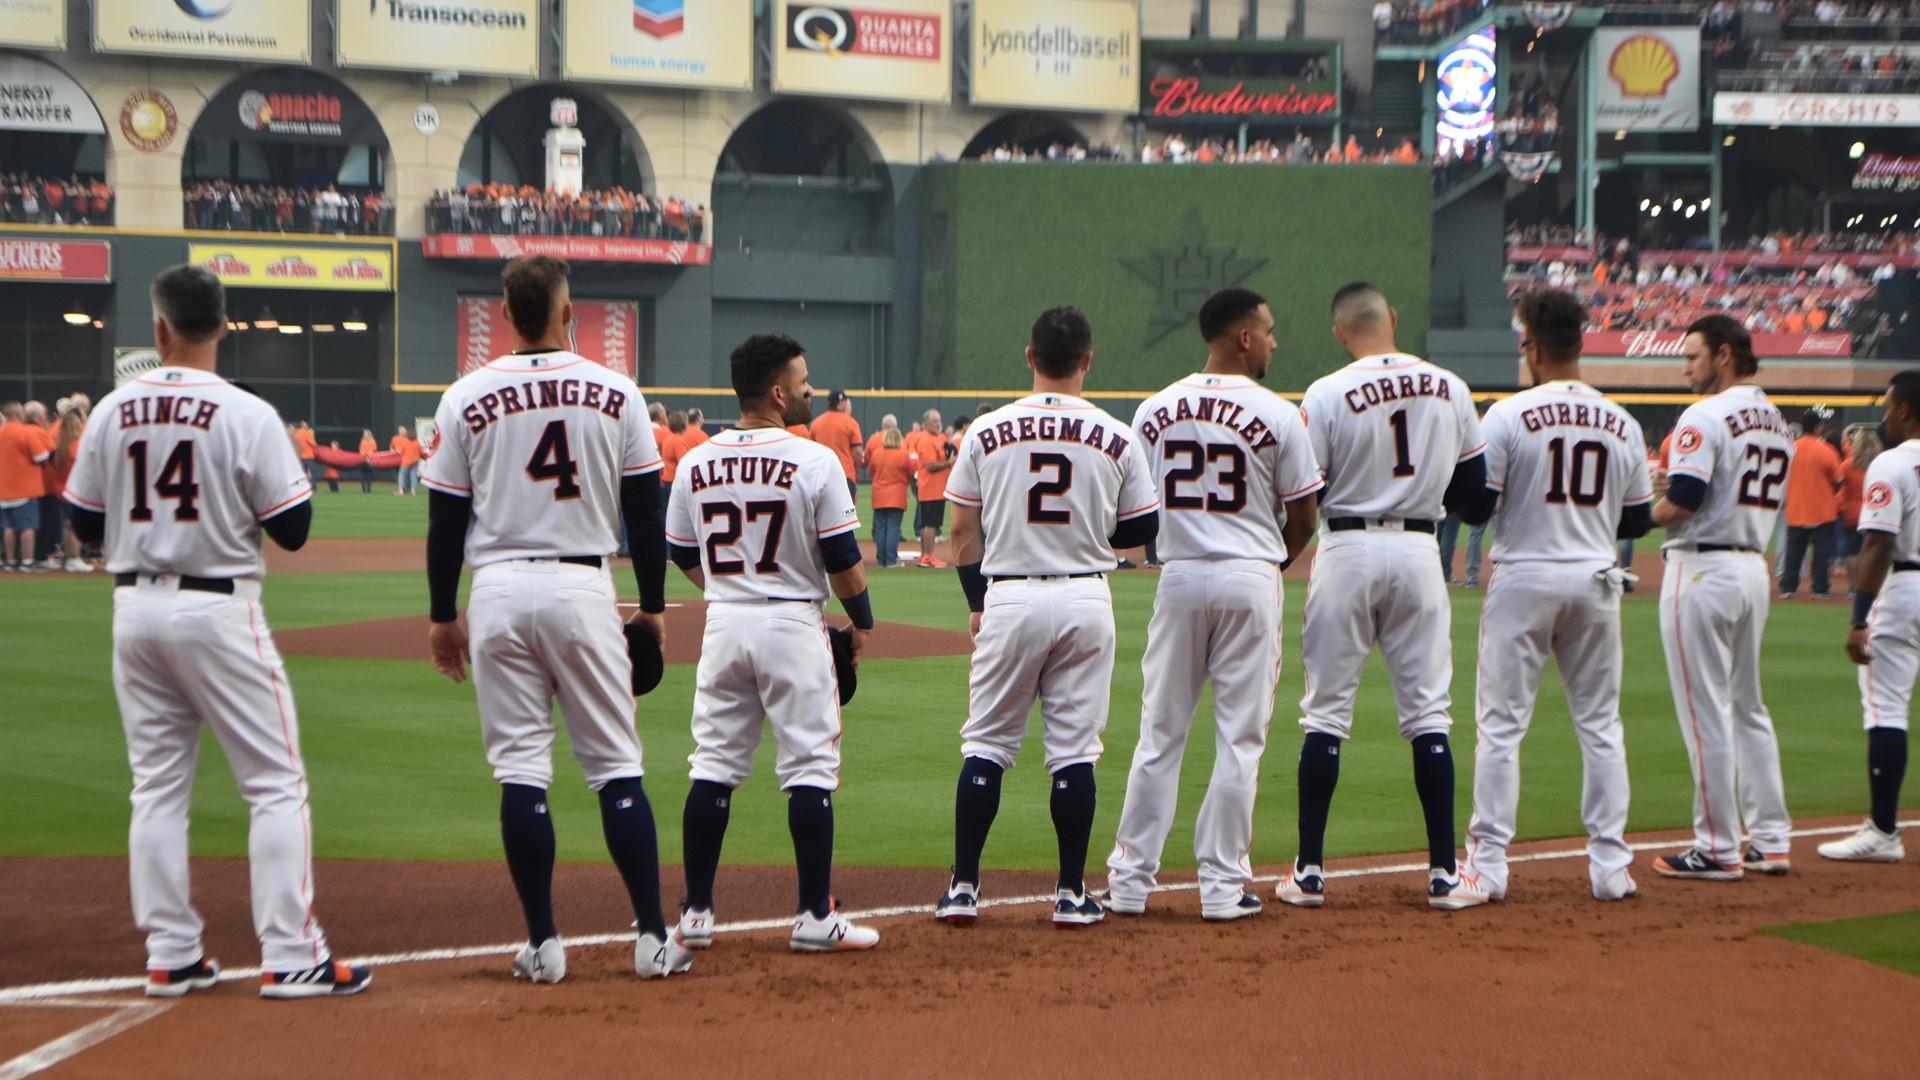 Photos Scenes from the Houston Astros' 2019 home opener